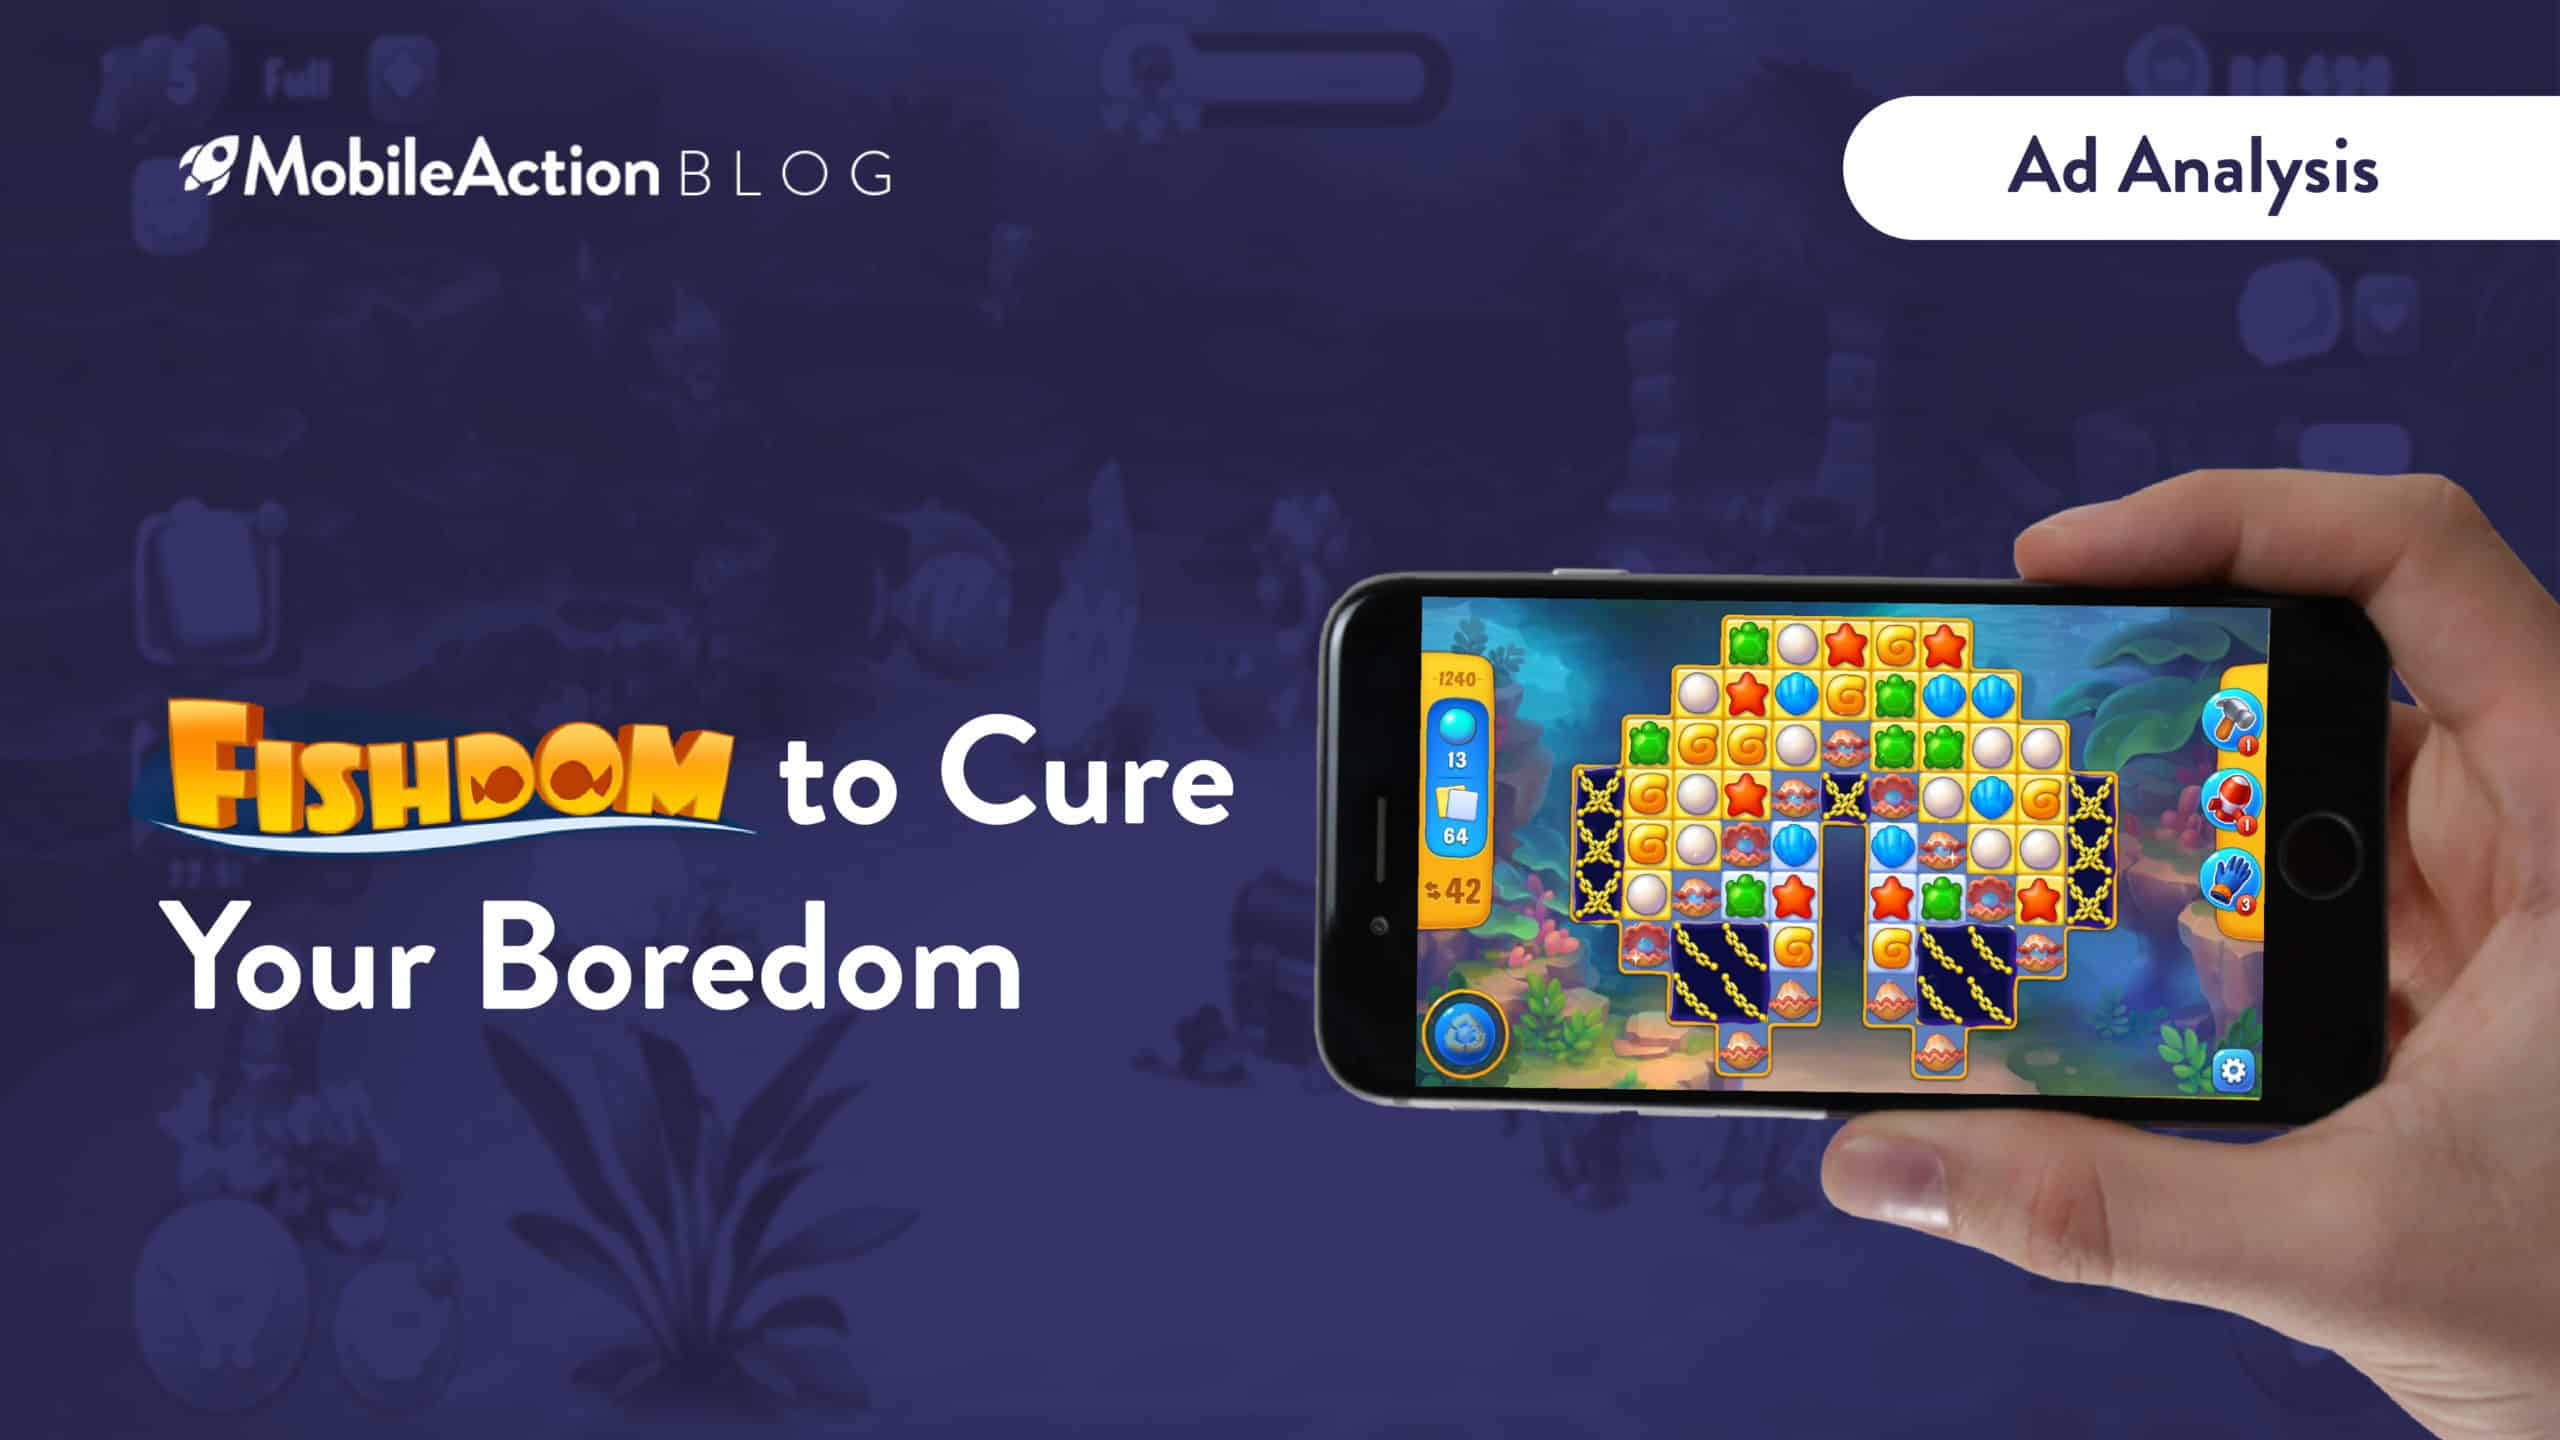 Ad Analysis: Fishdom to Cure Your Boredom